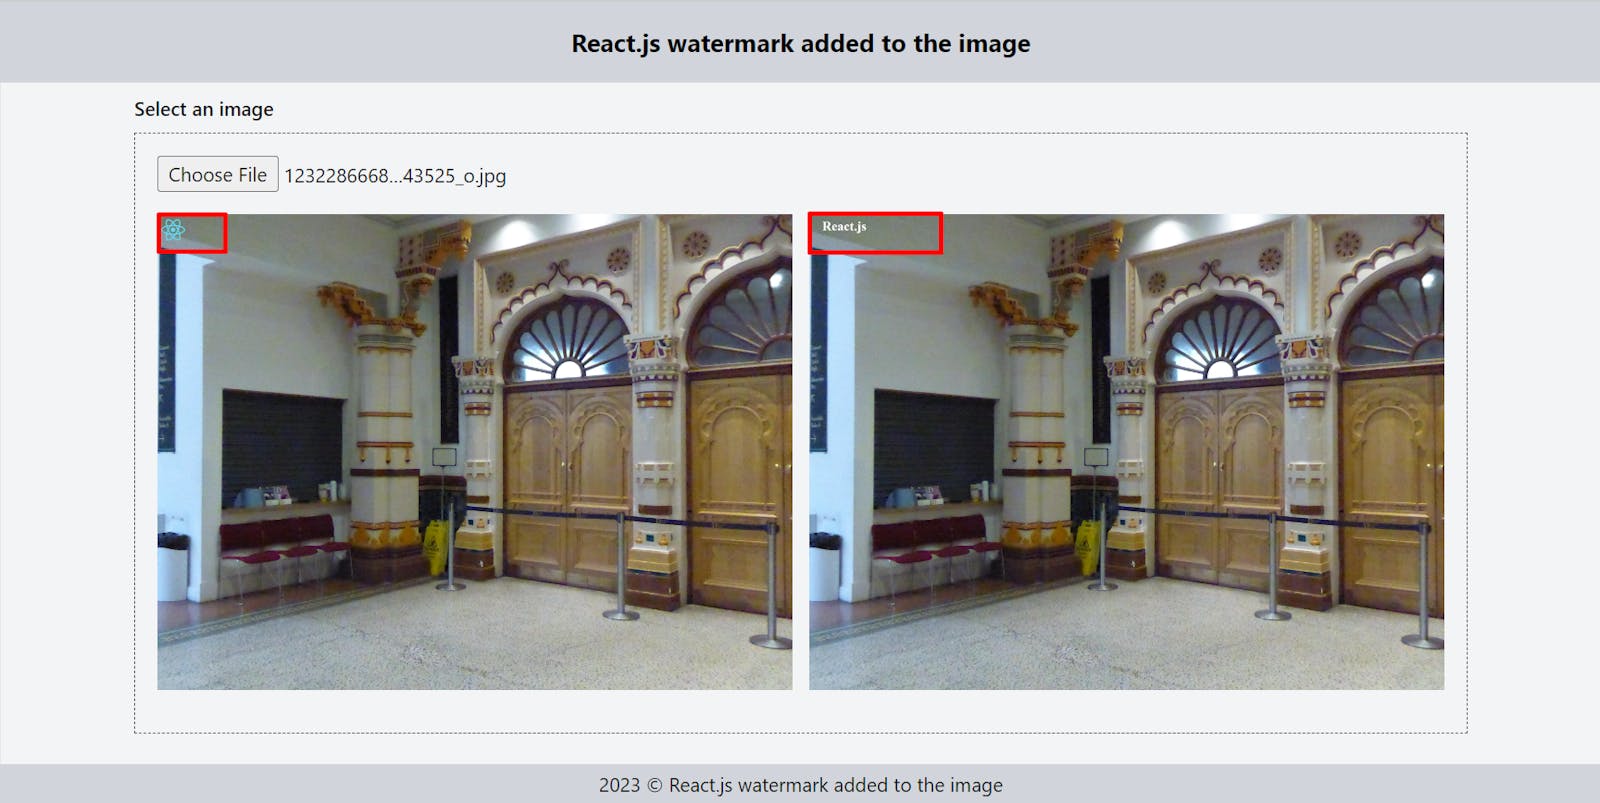 React.js watermark added to the image